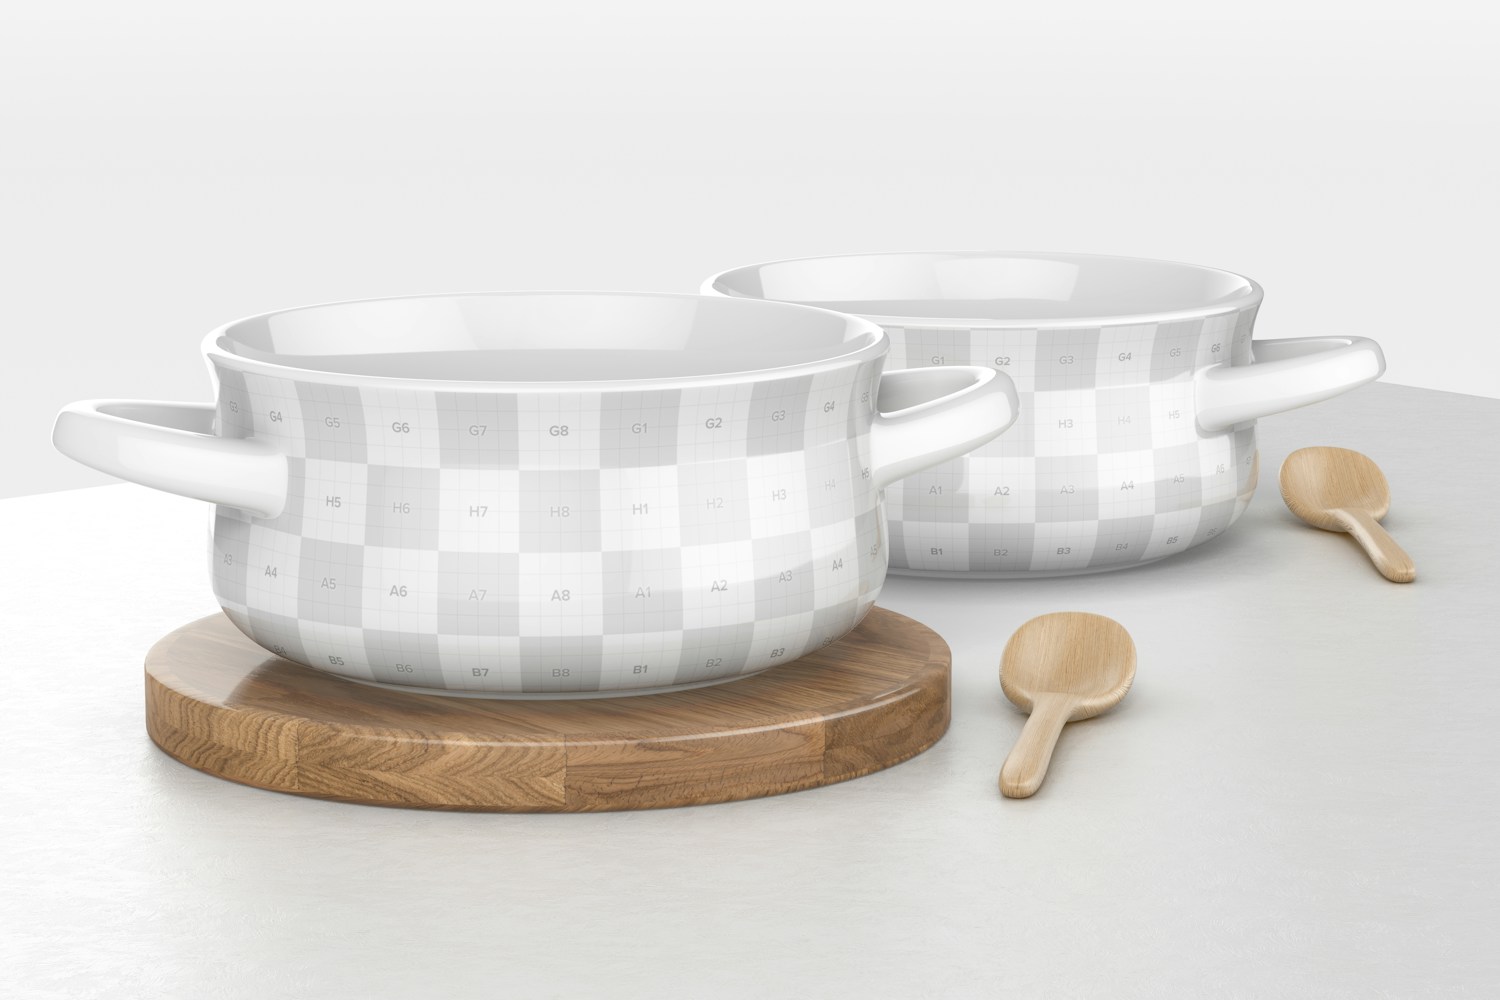 Ceramic Soup Bowls with Handles Mockup, Front View